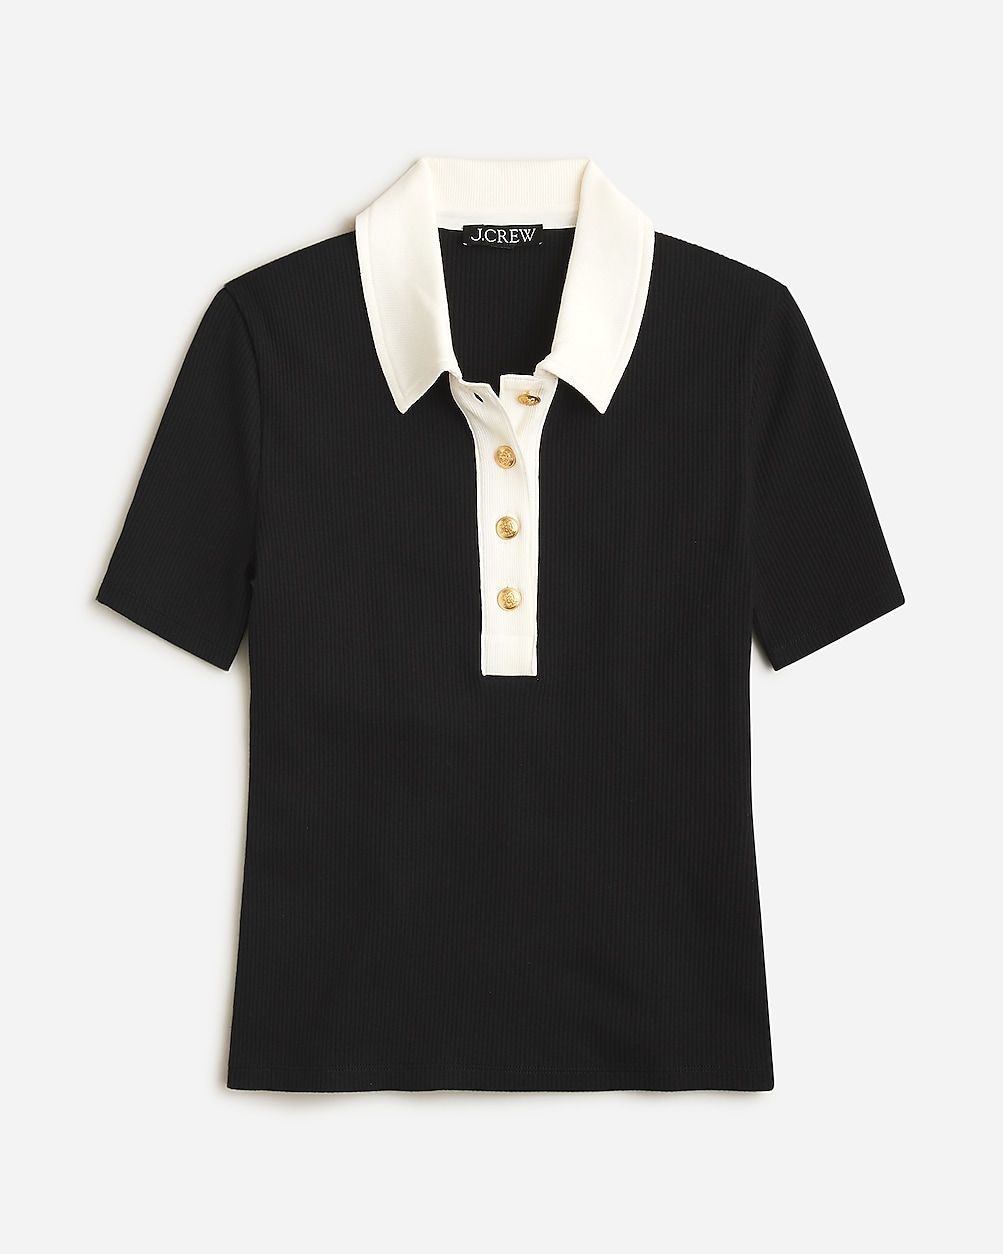 best seller4.6(78 REVIEWS)Vintage rib polo T-shirt$59.5030% off full price with code SHOP30Black ... | J.Crew US